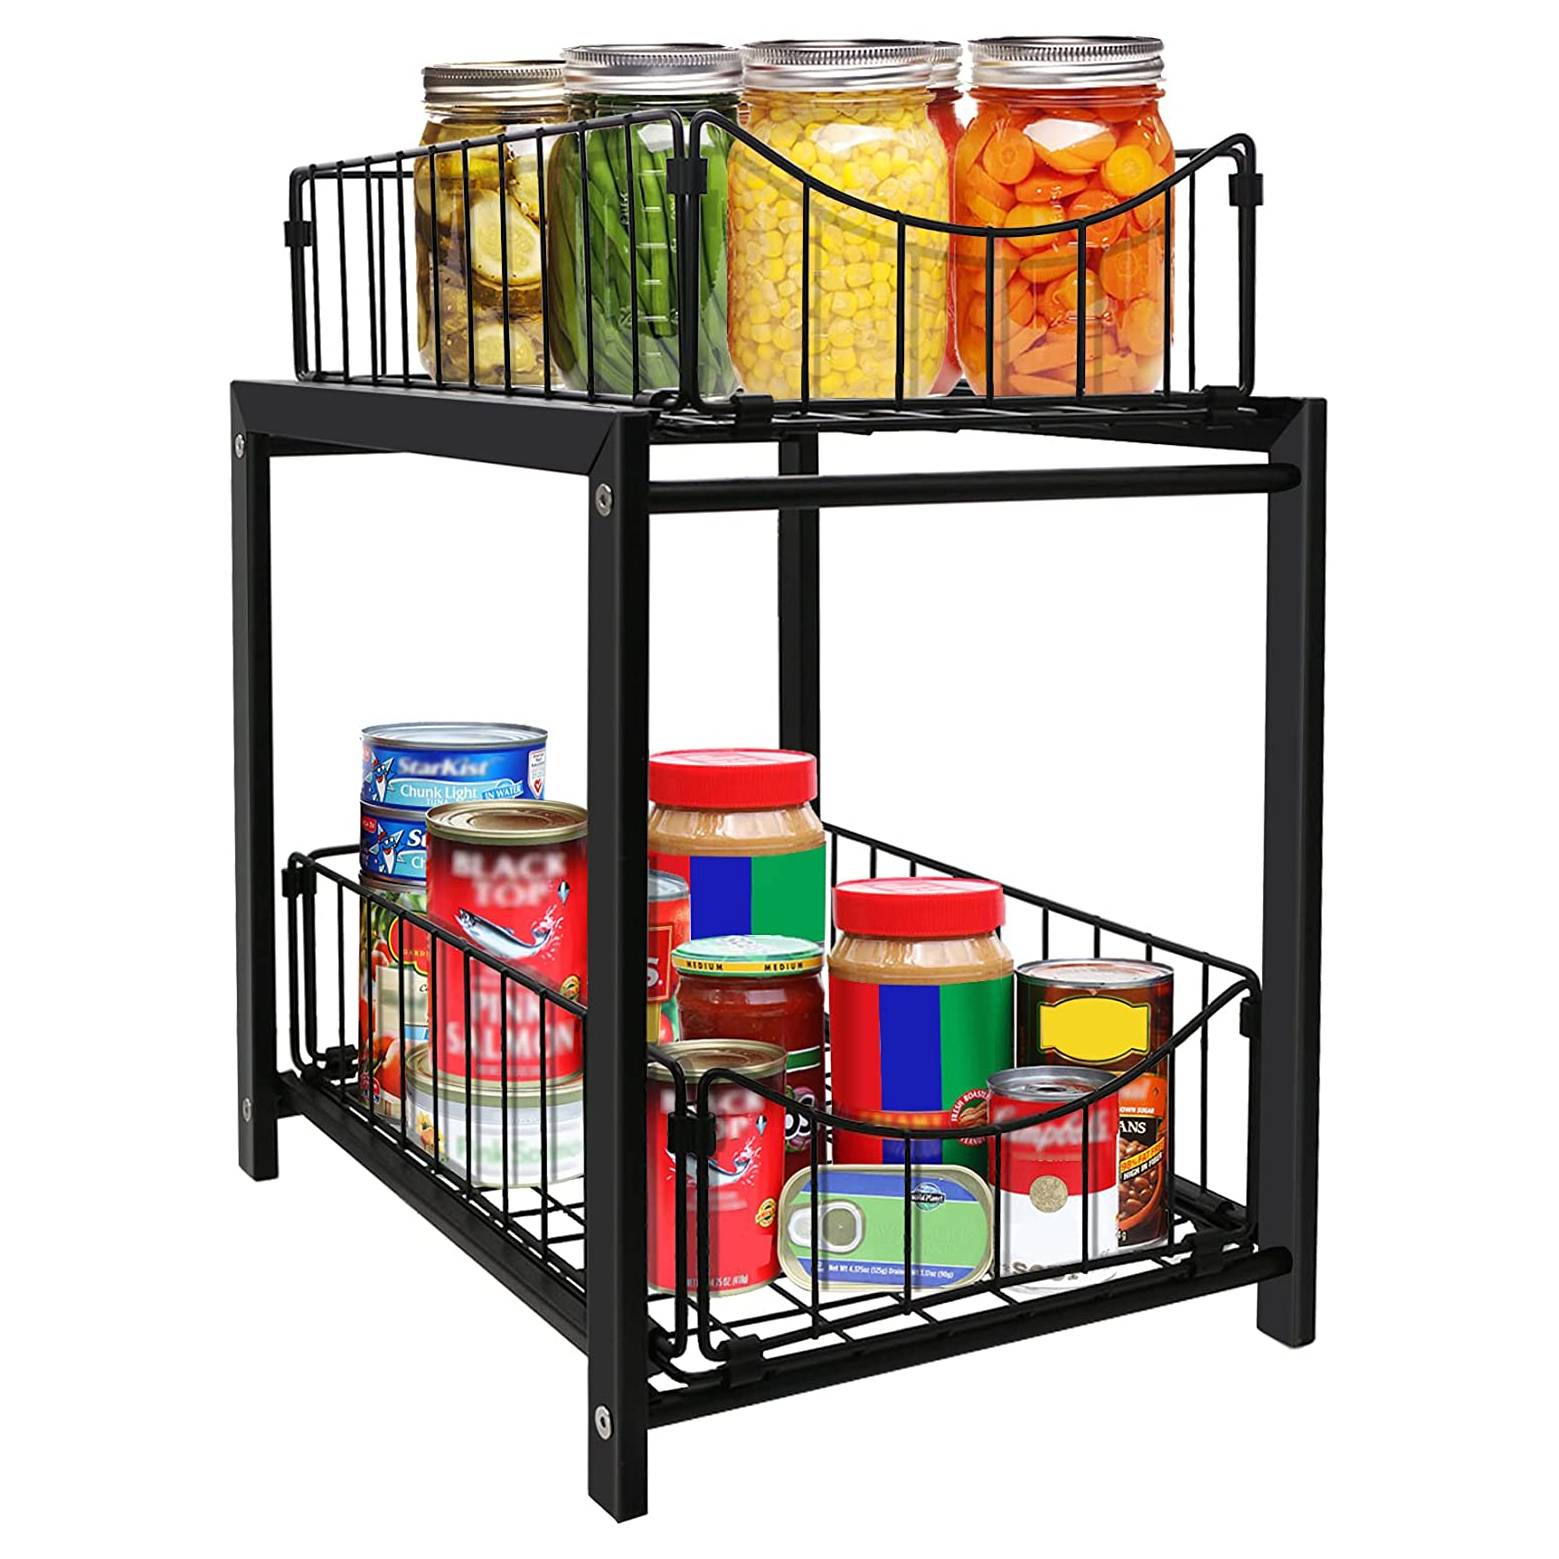 Under Sink Organizer 2-Tier Pull-out Mesh Basket Rack for Cabinet or Countertop, Expand Storage Space for Kitchen & Bathroom Featured Image